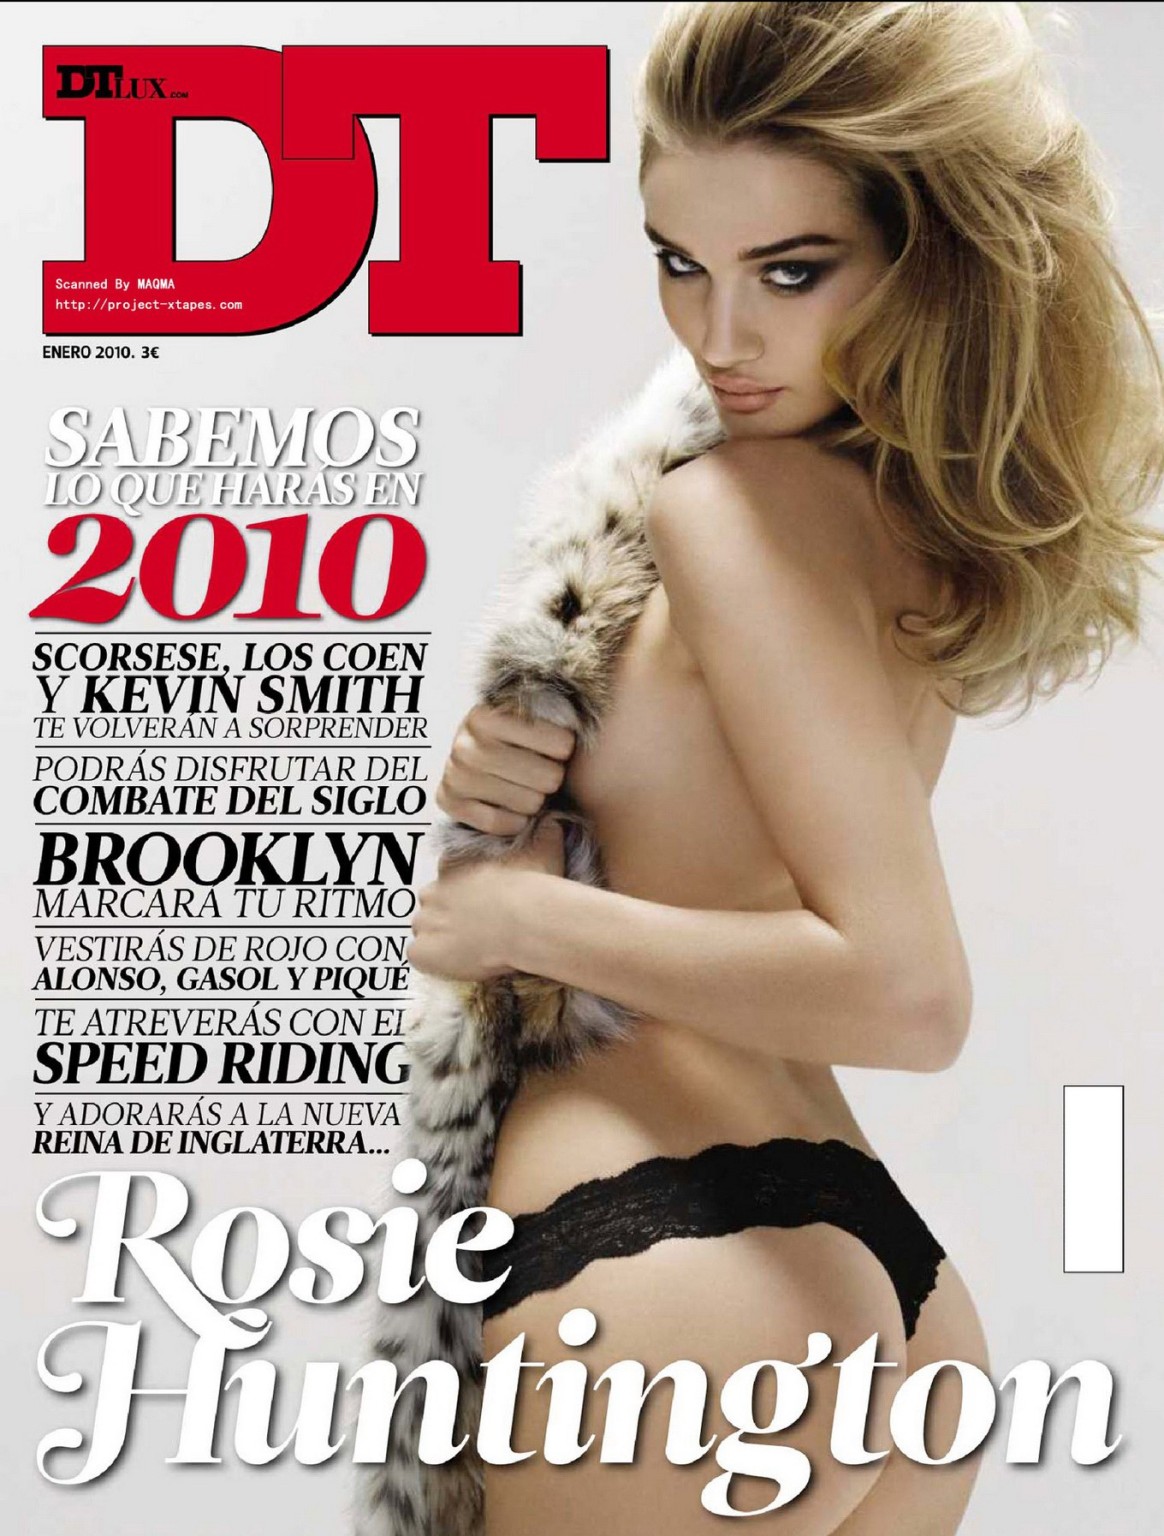 Rosie Huntington-Whiteley posing topless for January 2011 issue of Spanish DT 'z #75323472